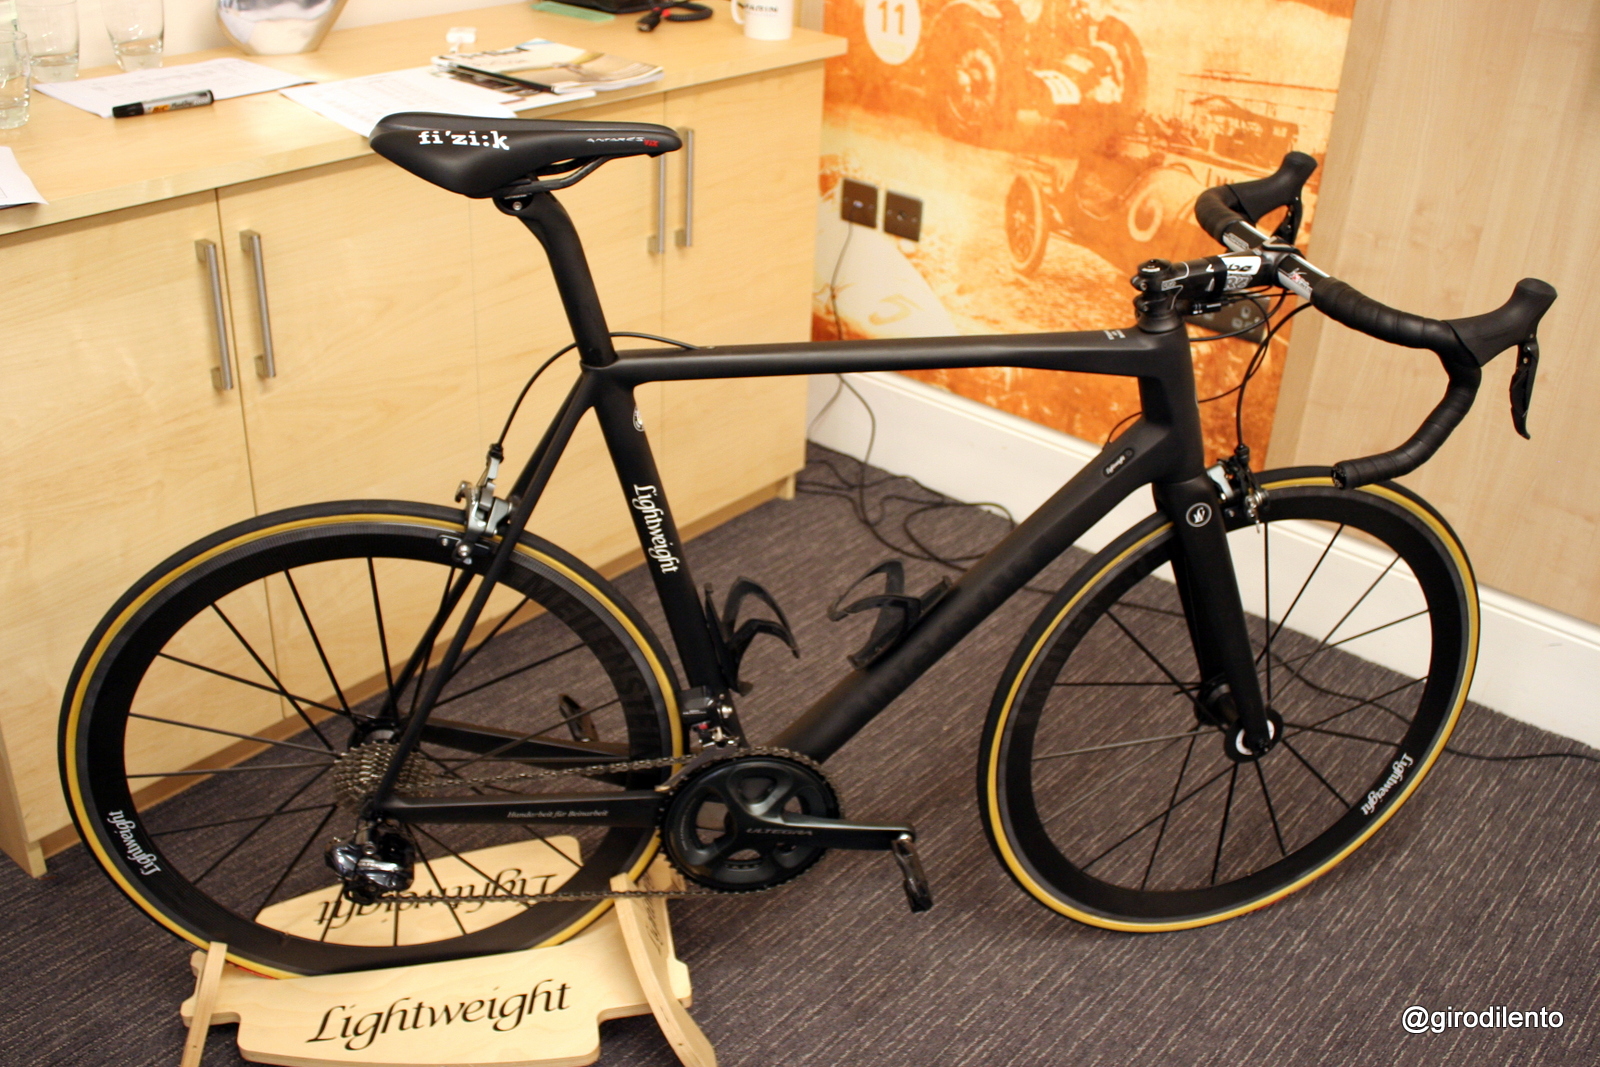 Lightweight Urgestalt with Ultegra 11 speed Di2 and Lightweight wheels, bars and cages